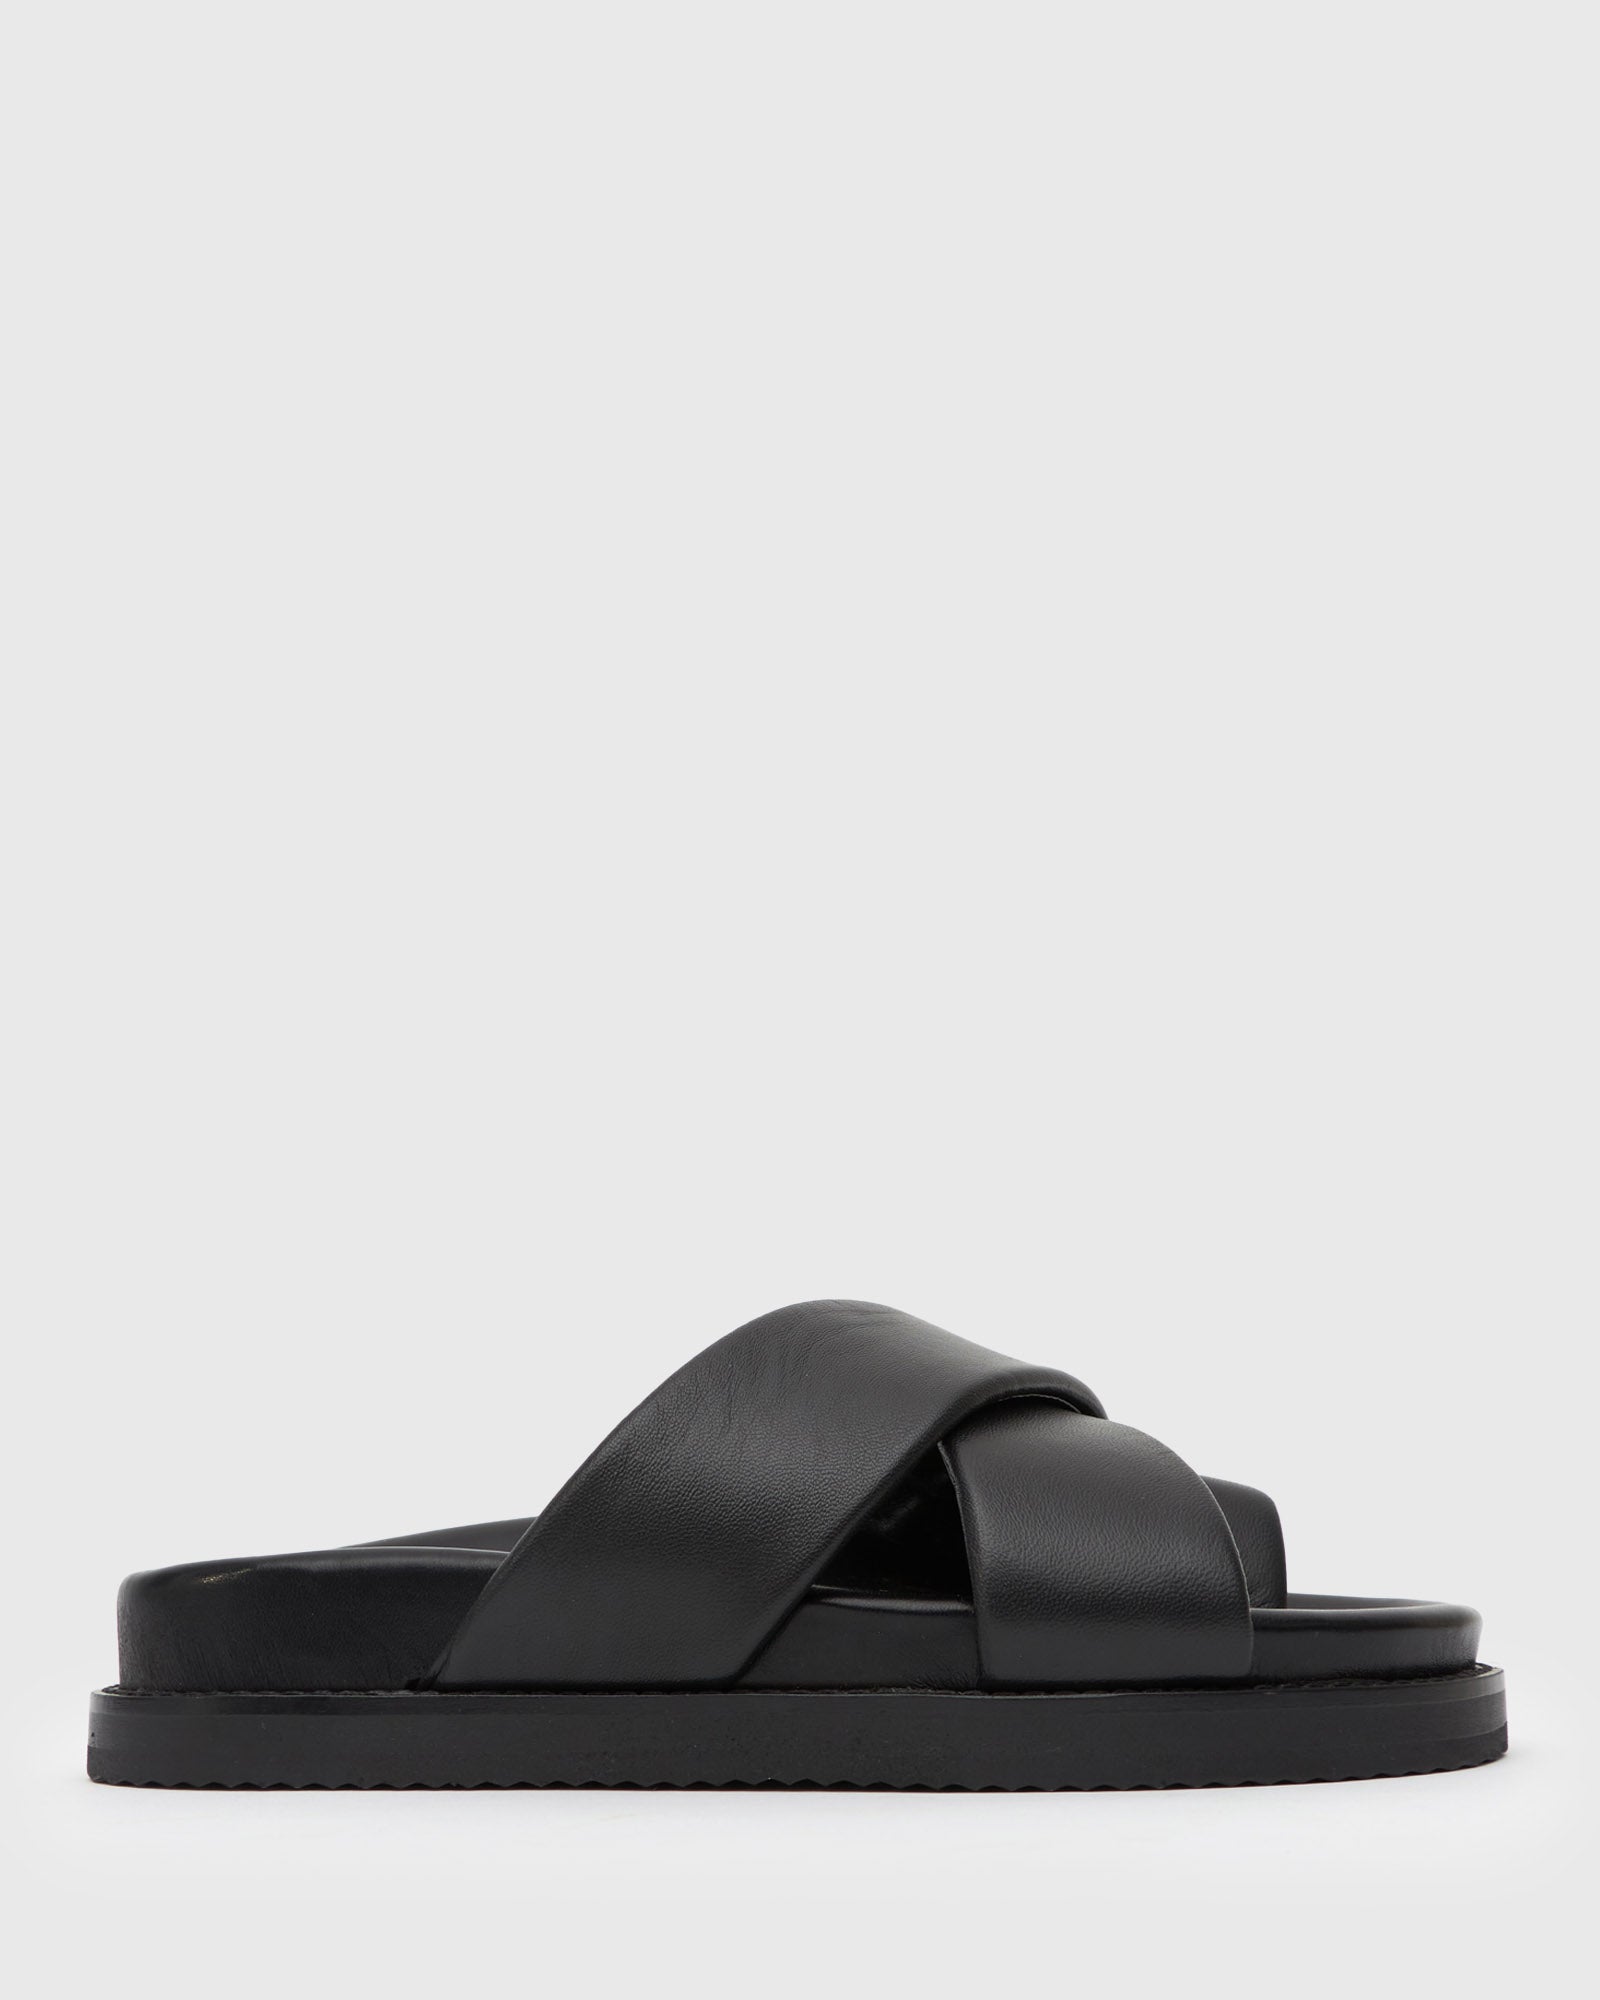 Buy BERMUDA Leather Crossover Slide Sandals by Betts online - Betts